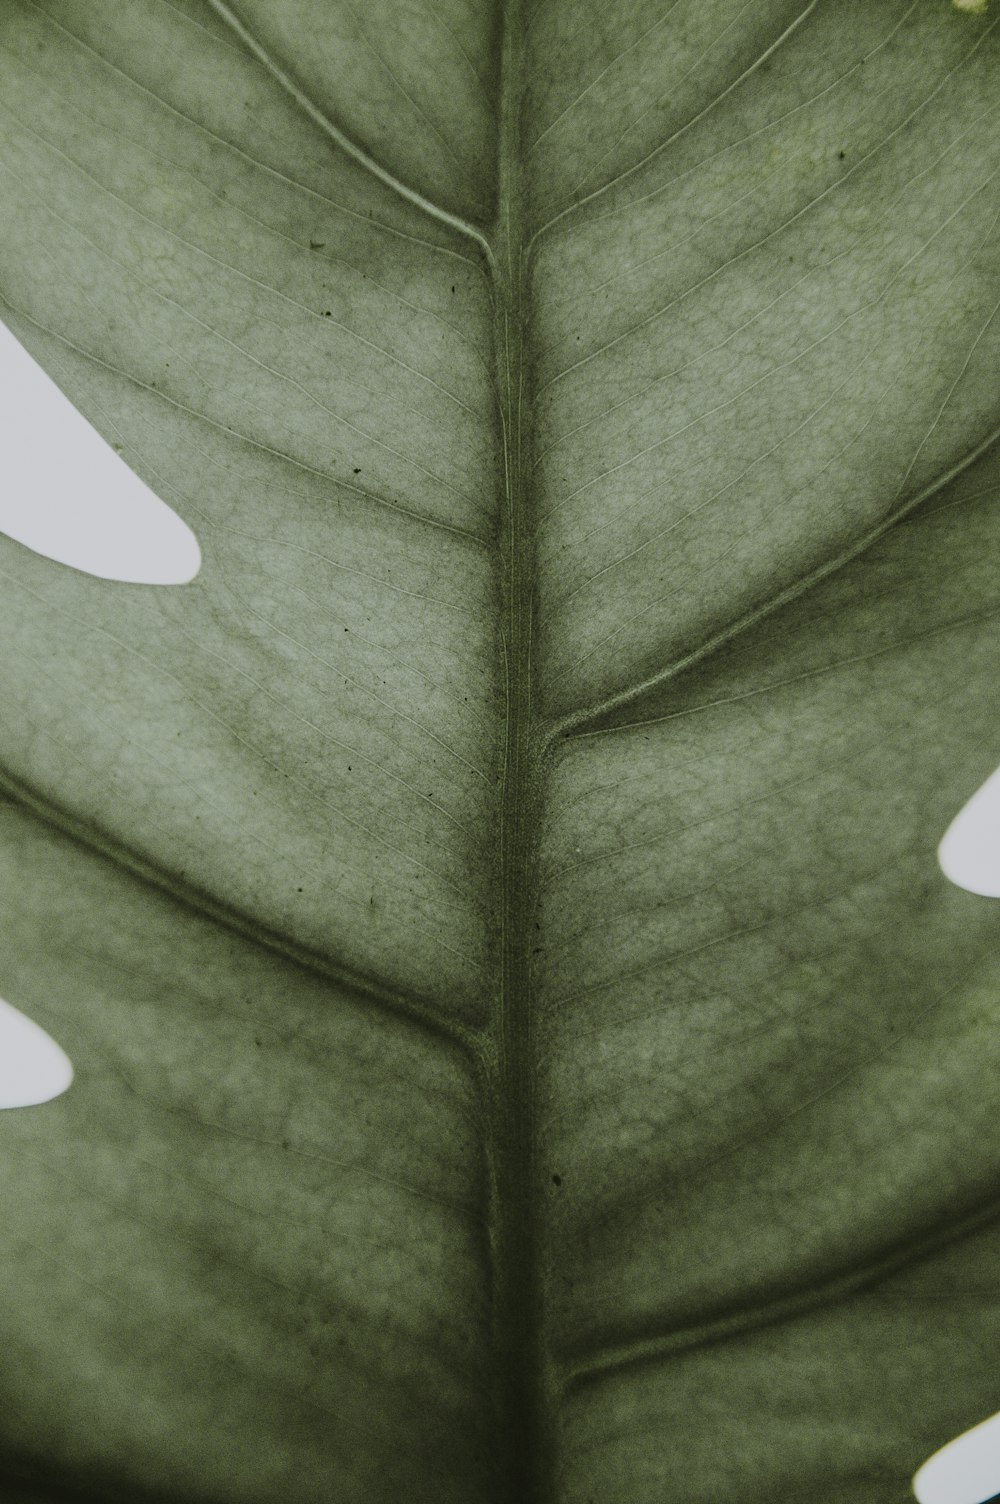 a close up of a green leaf with white spots